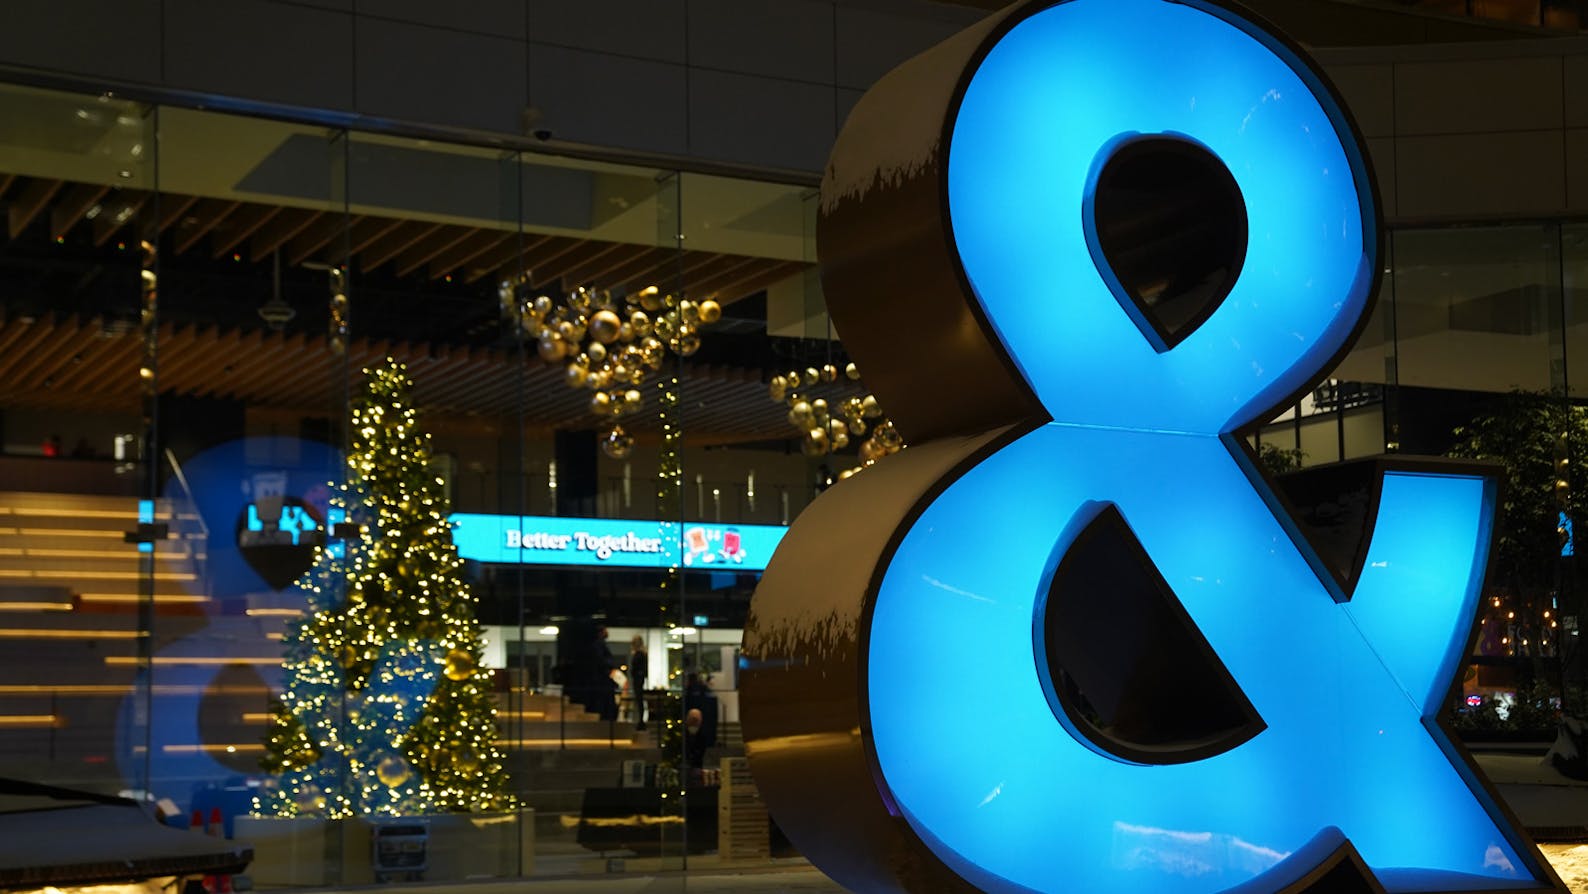 Large blue Ampersand outside the lobby of the Ampersand building, decorated for the holidays